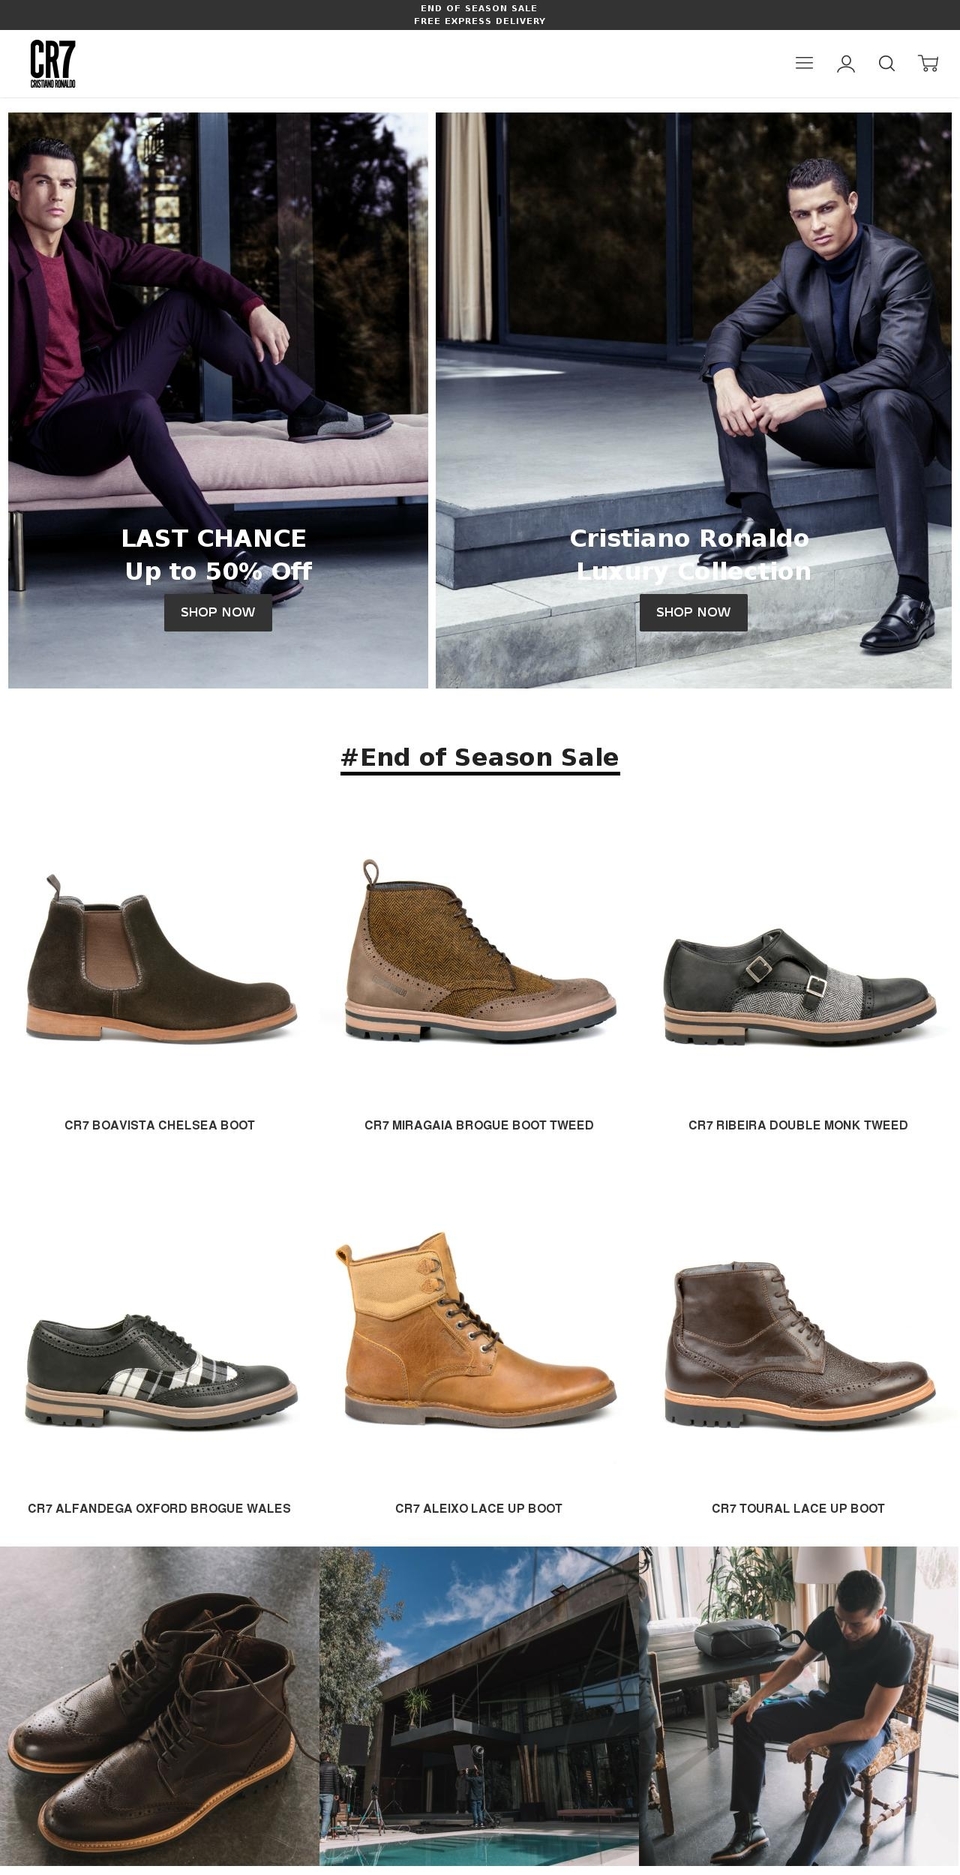 Ira Shopify theme site example cr7footwear.com